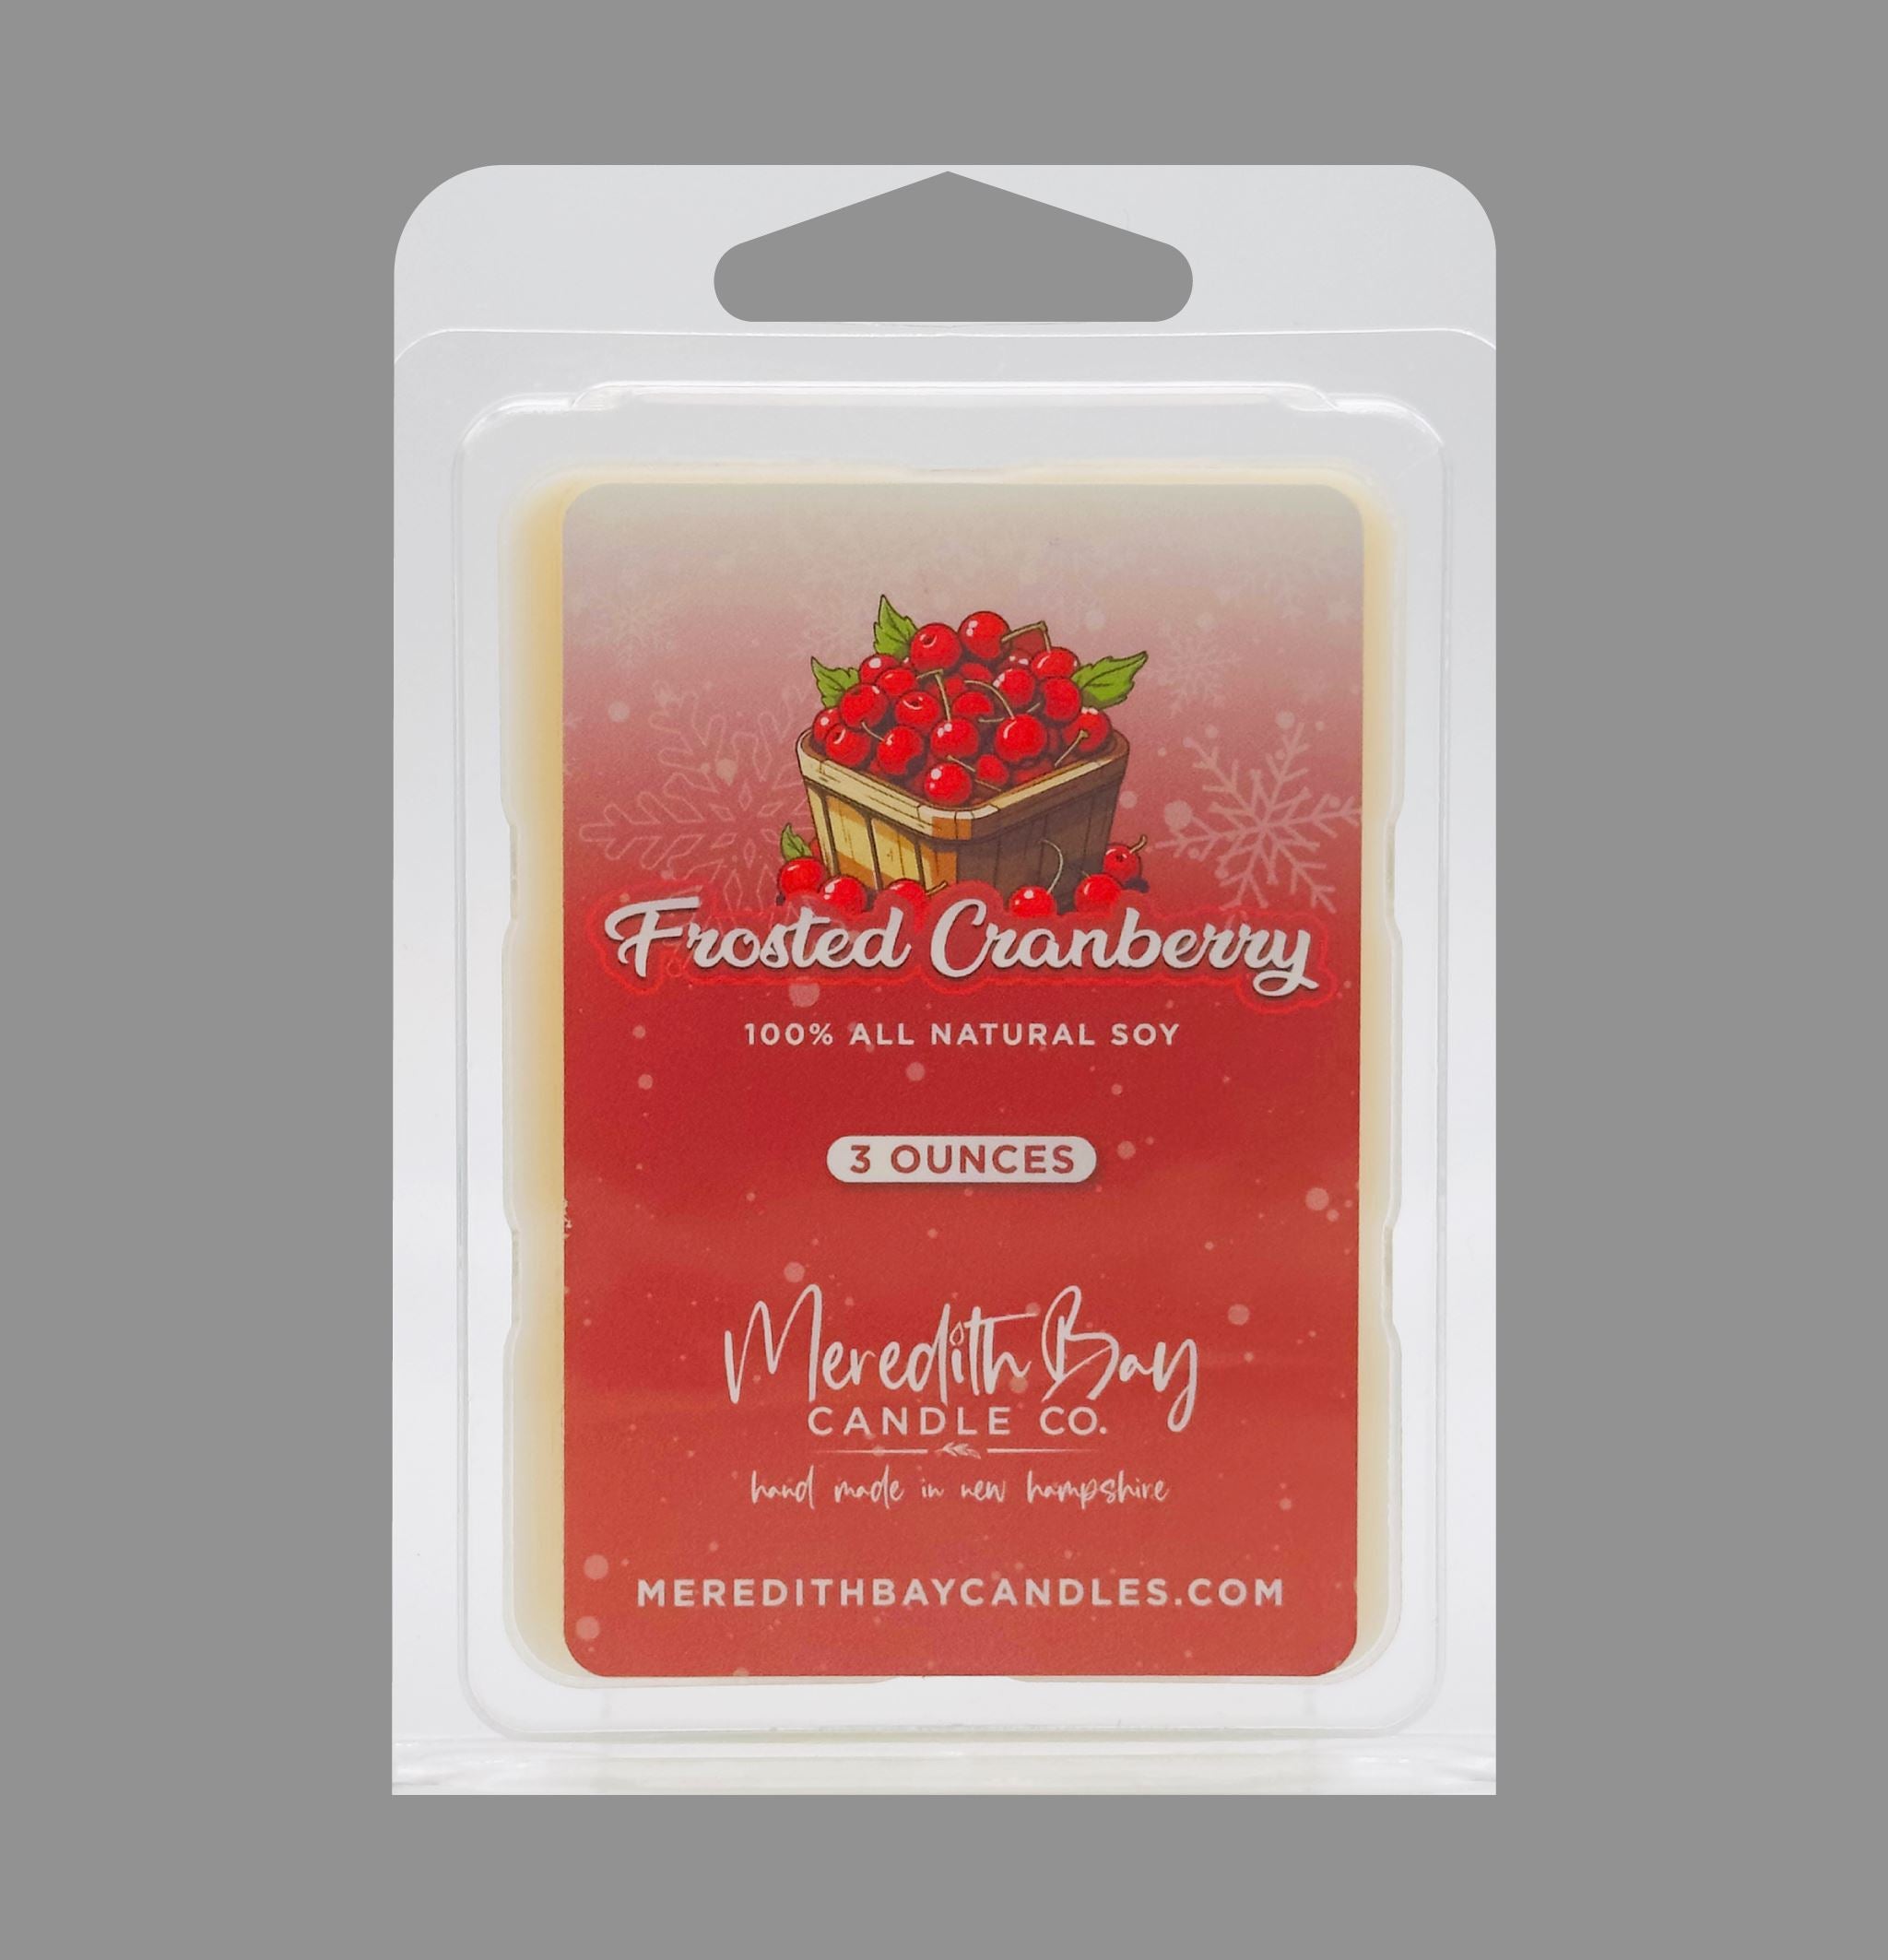 Frosted Cranberry Wax Melt Meredith Bay Candle Co 